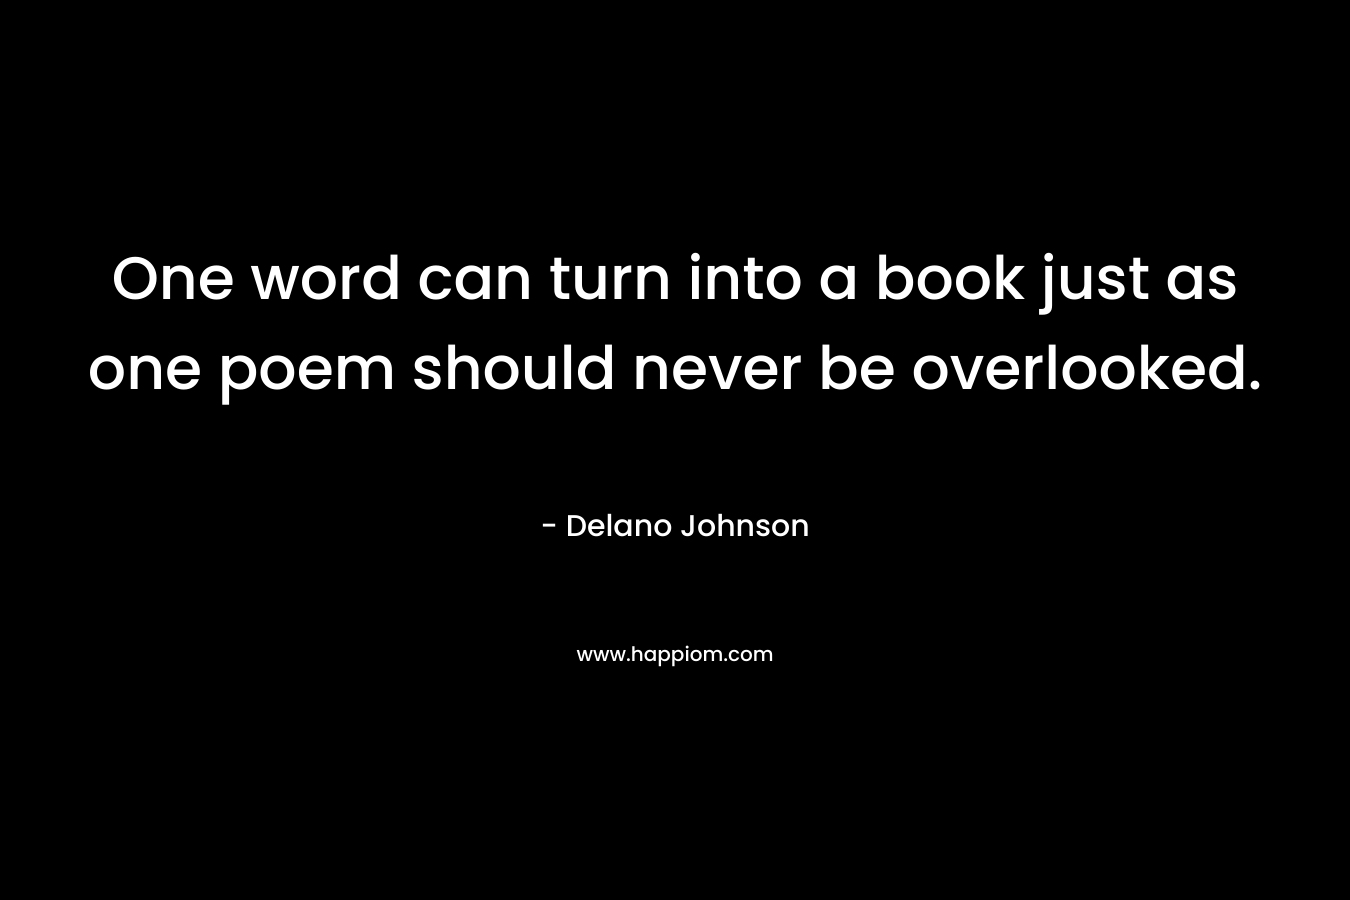 One word can turn into a book just as one poem should never be overlooked. – Delano Johnson